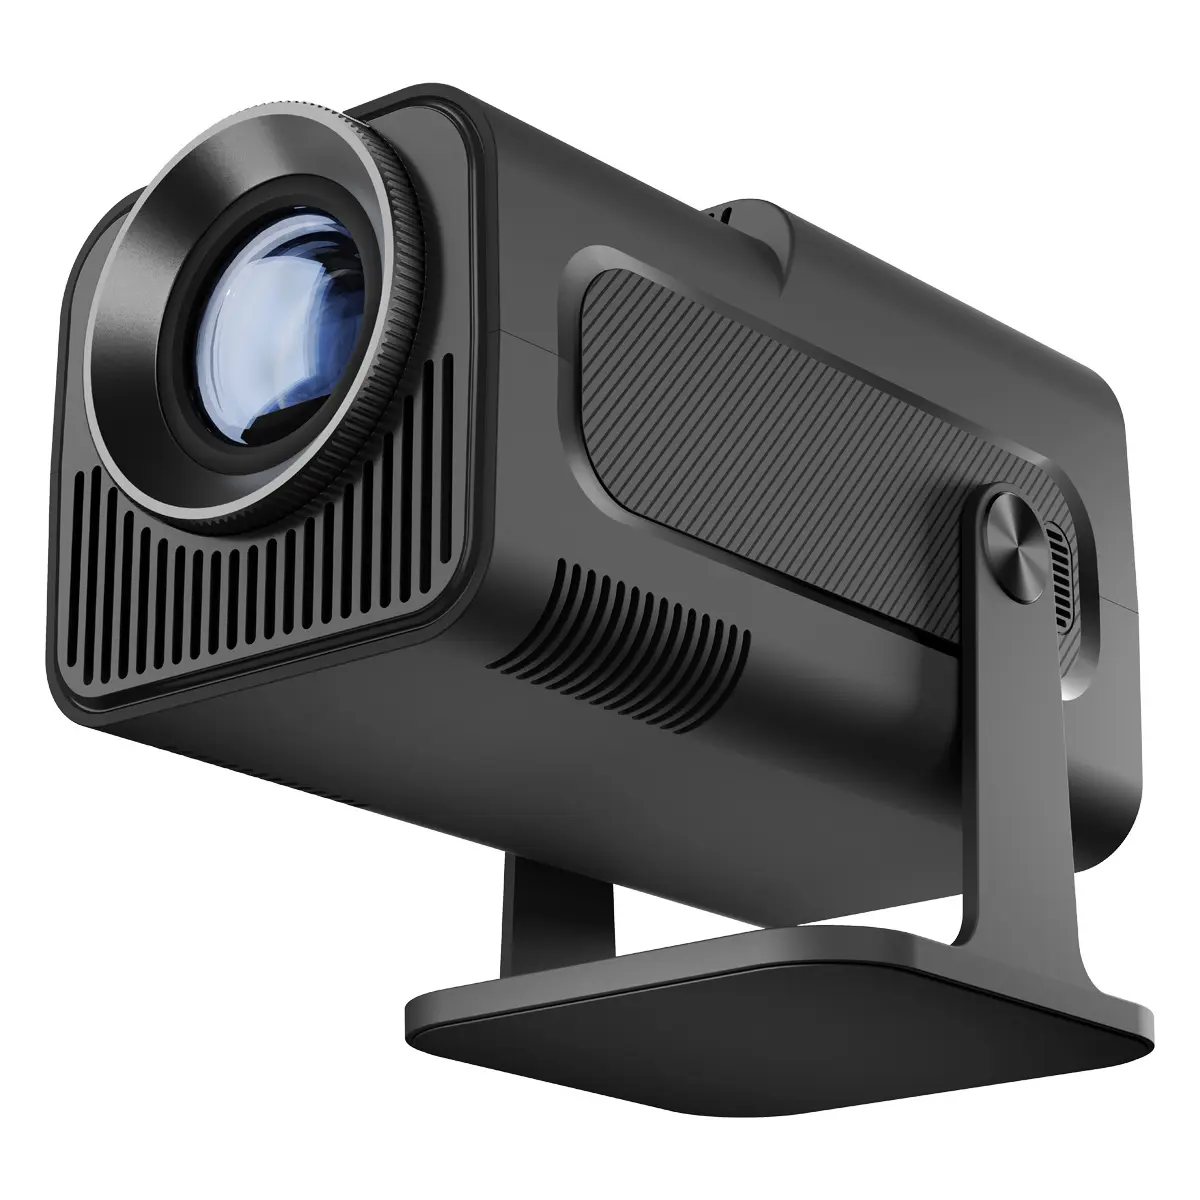 Brand New HY320 Ceiling Mount Projector Native 1080P Full HD 300 Lumens Projection Equipment LCD Projector Screen Video